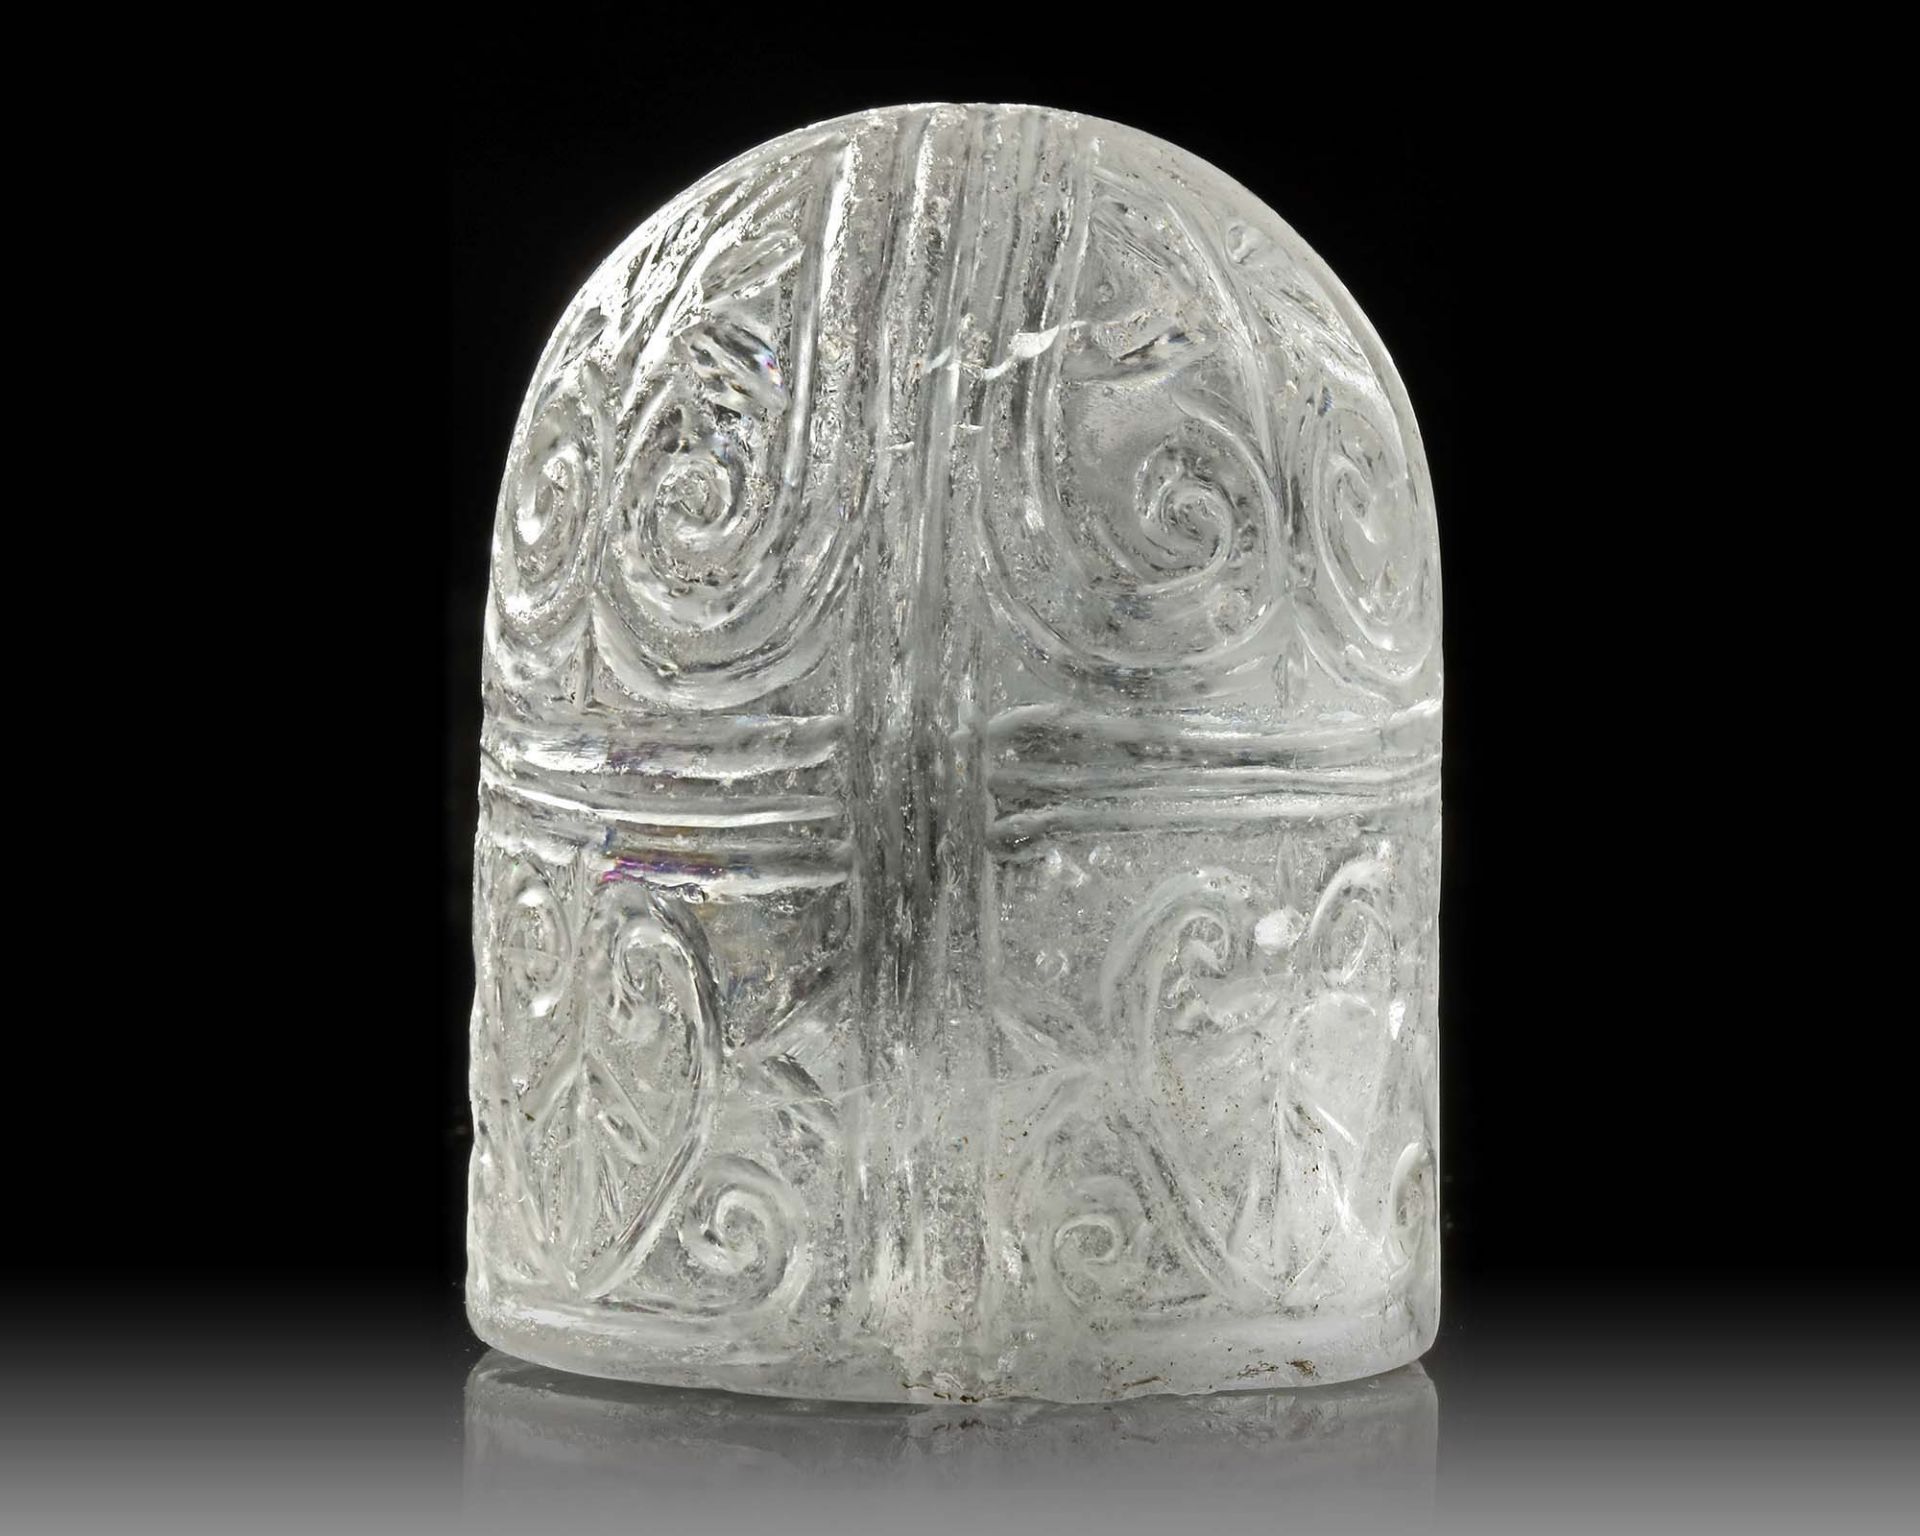 A FATIMID ROCK CRYSTAL CHESS PIECE, EGYPT, 11TH CENTURY - Image 3 of 8